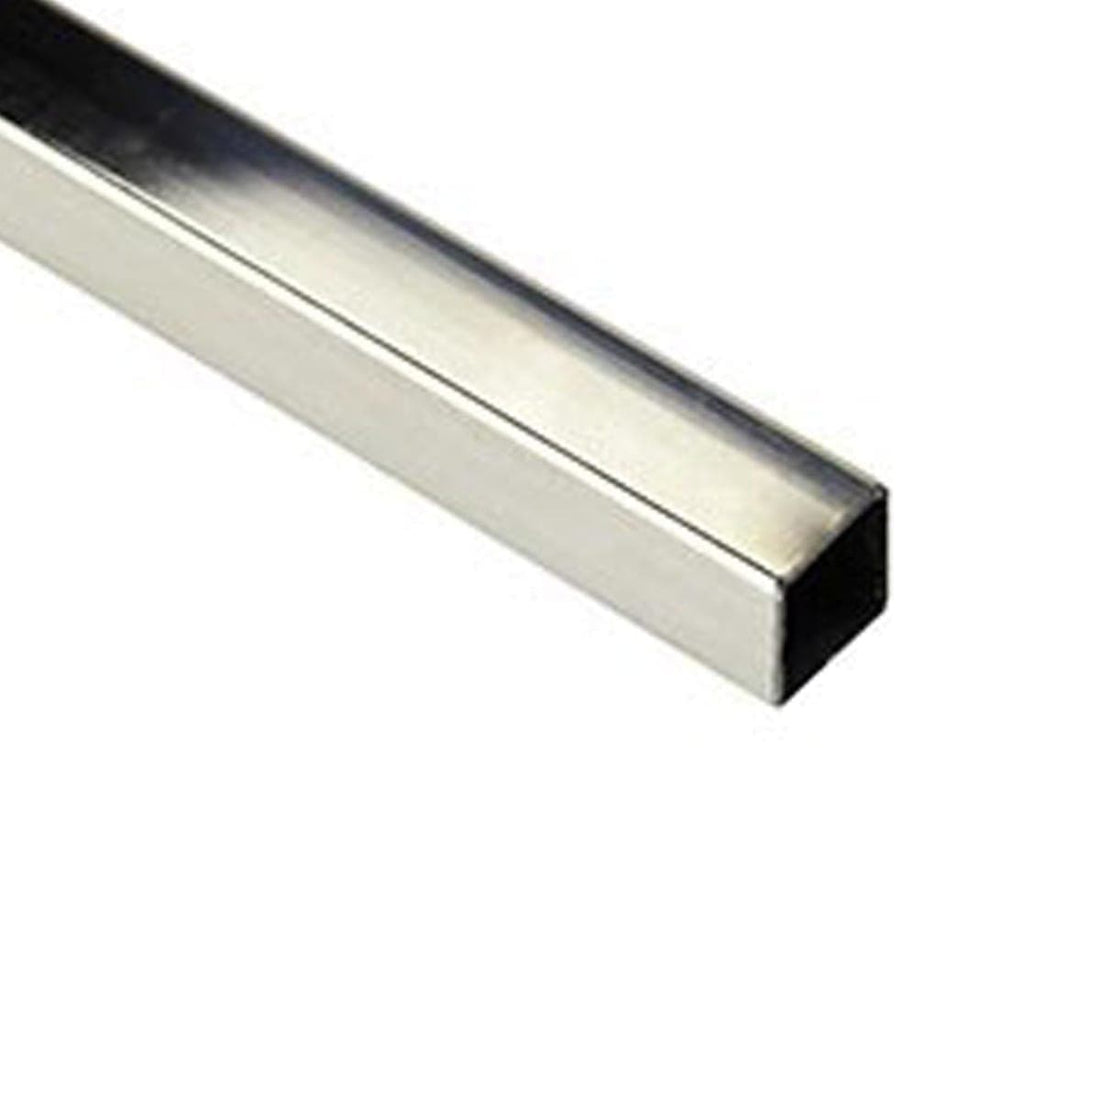 SQUARE TUBE PROFILE 15X15X0.5MM STAINLESS STEEL AISI 304 - best price from Maltashopper.com BR410003804